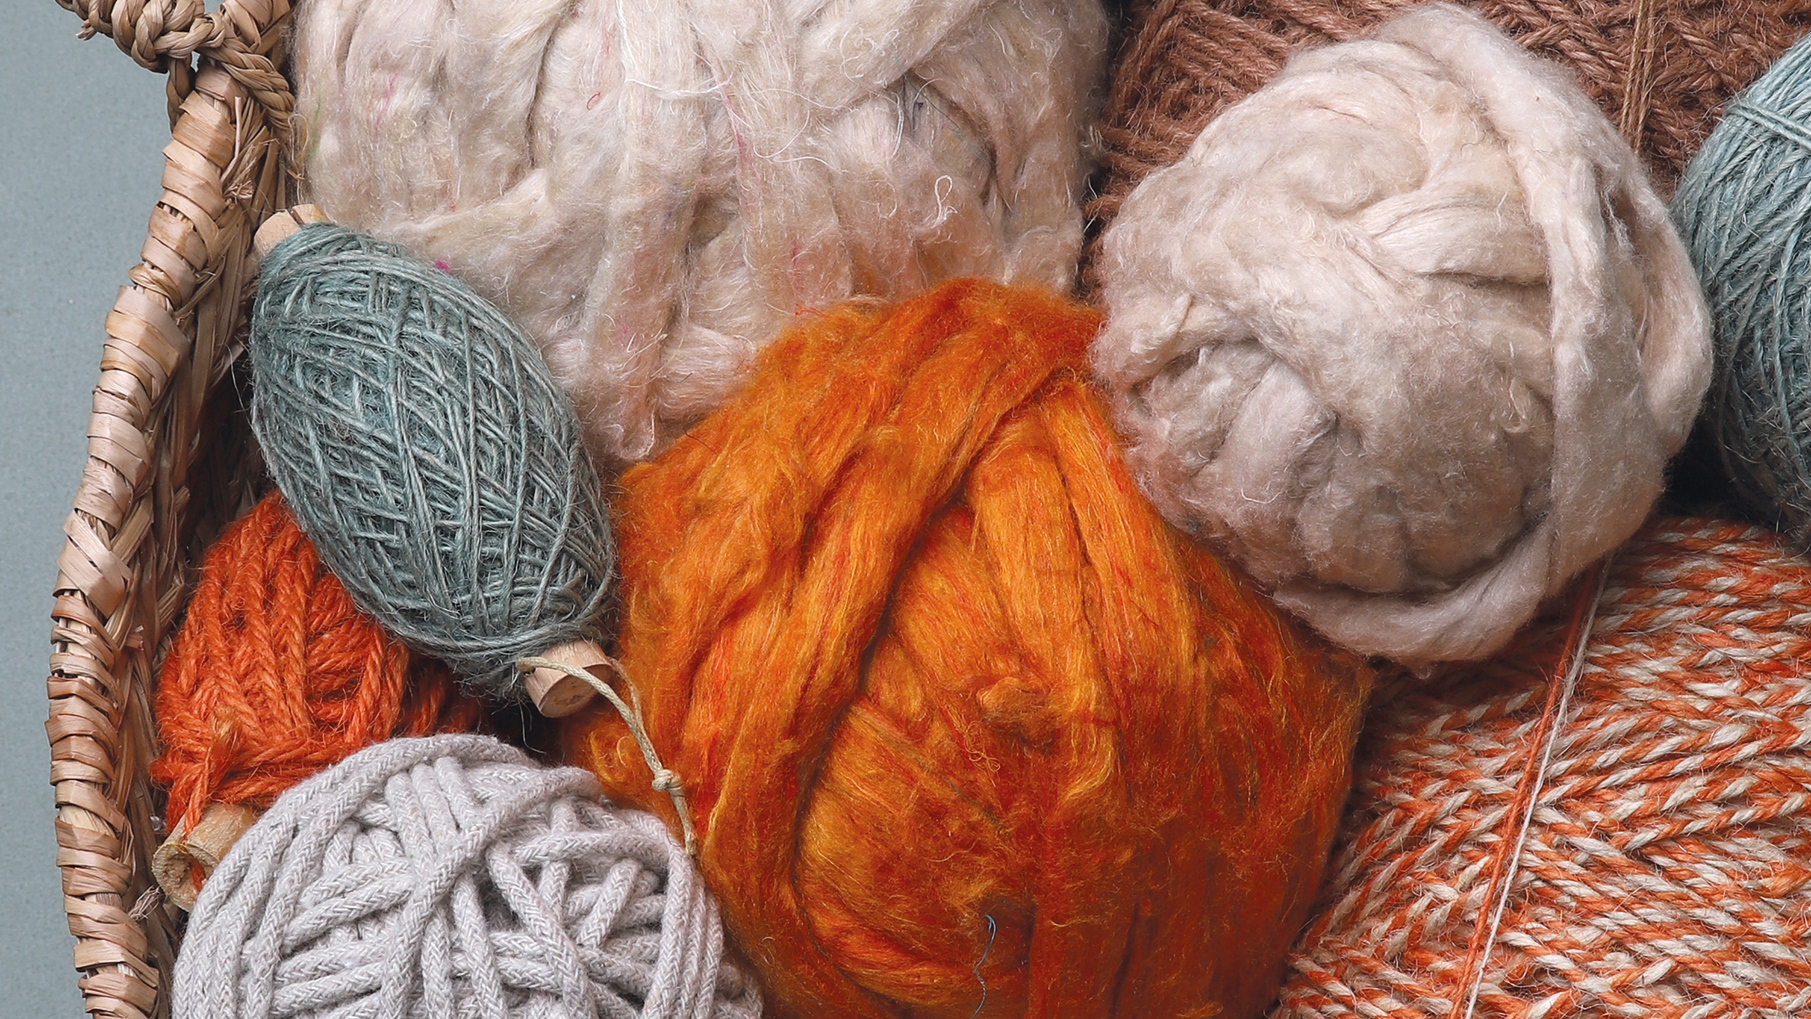 Wool and twine make you want to DIY and can be used for creative packaging. Photo: Vivant